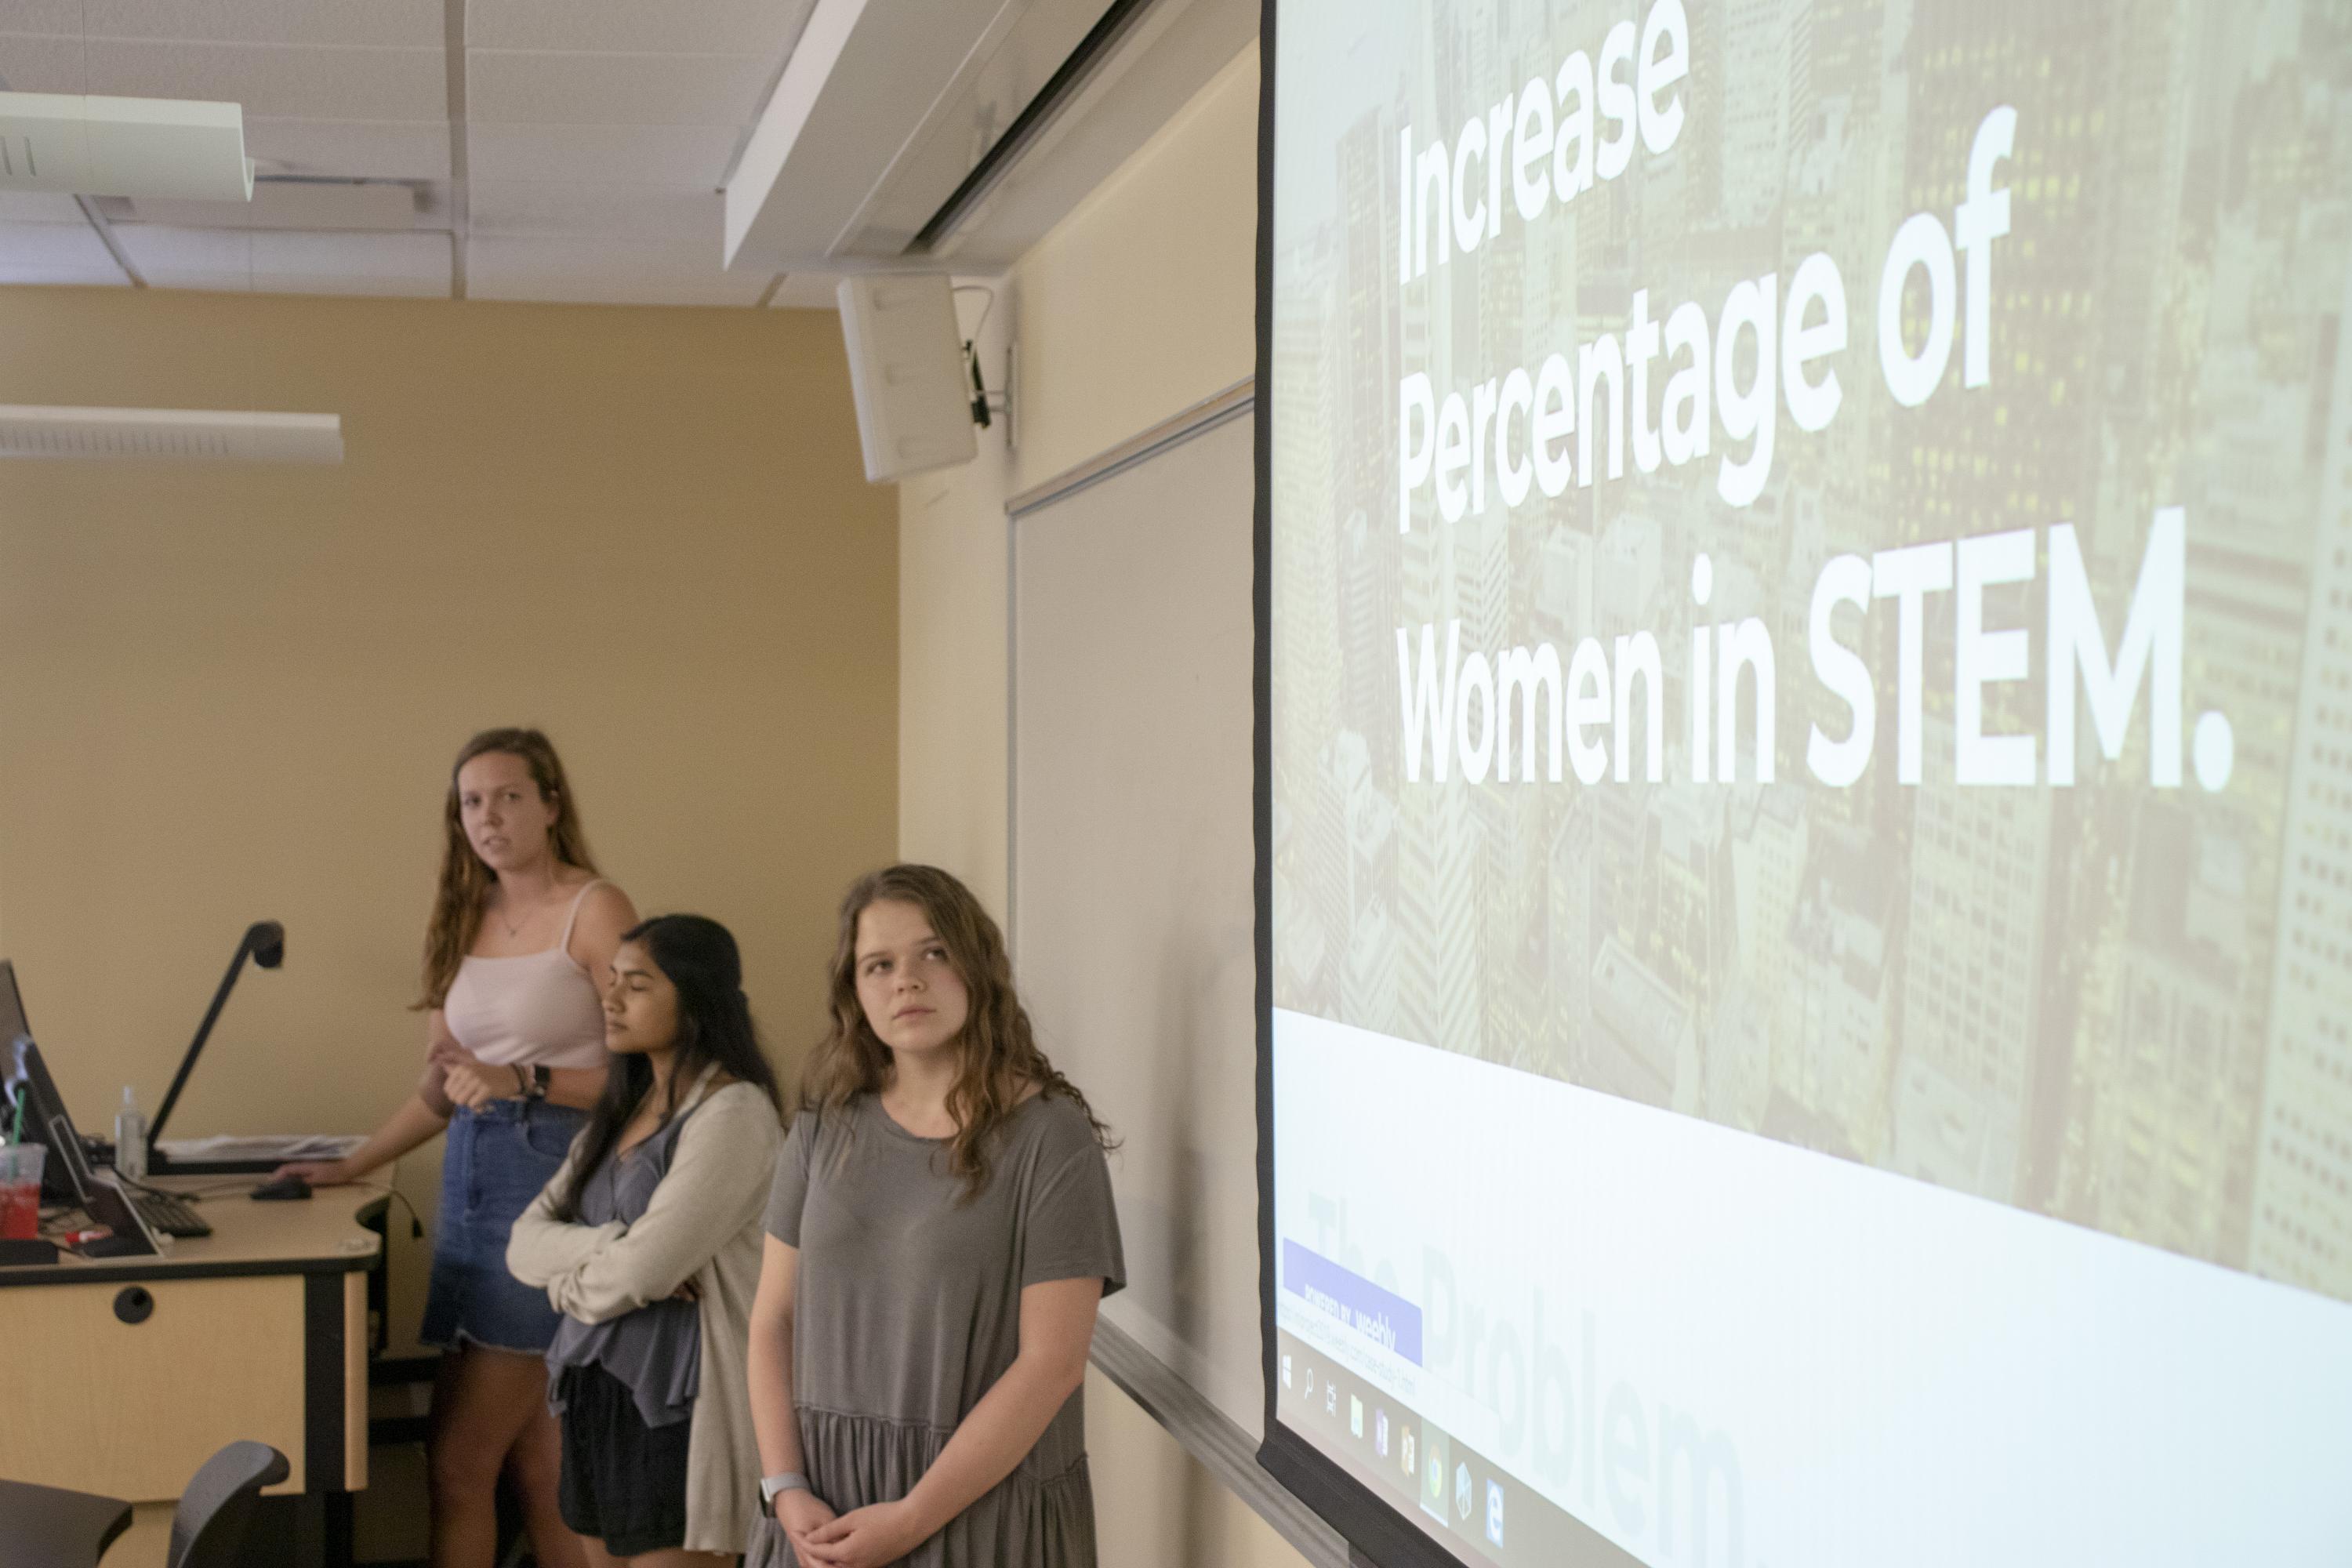 From left, first-year students Caitlyn Beals, Sabirah Haque, and Juliet Orth, present their Humanities in the Field project as part of the Career Design for Global Citizenship class on April 17, 2019. For their project, the students, who are residents of the Global Leadership Living Learning Community, researched companies that work to create increased access to education for underrepresented and disadvantaged communities, in Atlanta and nationally.